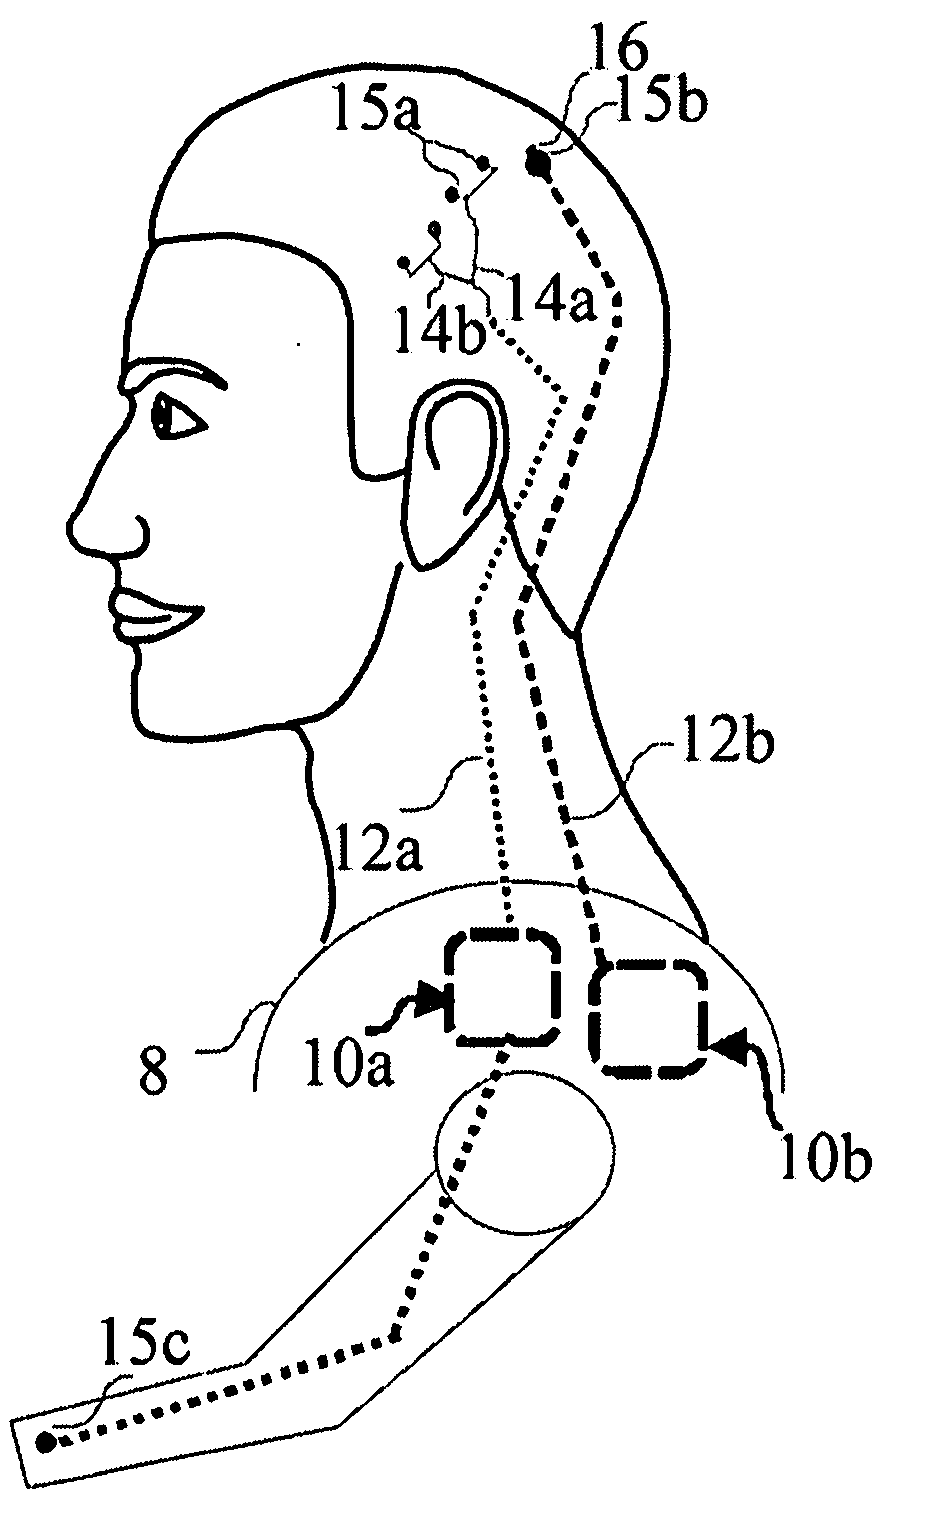 Methods and Systems for semi-automatic adjustment of medical monitoring and treatment